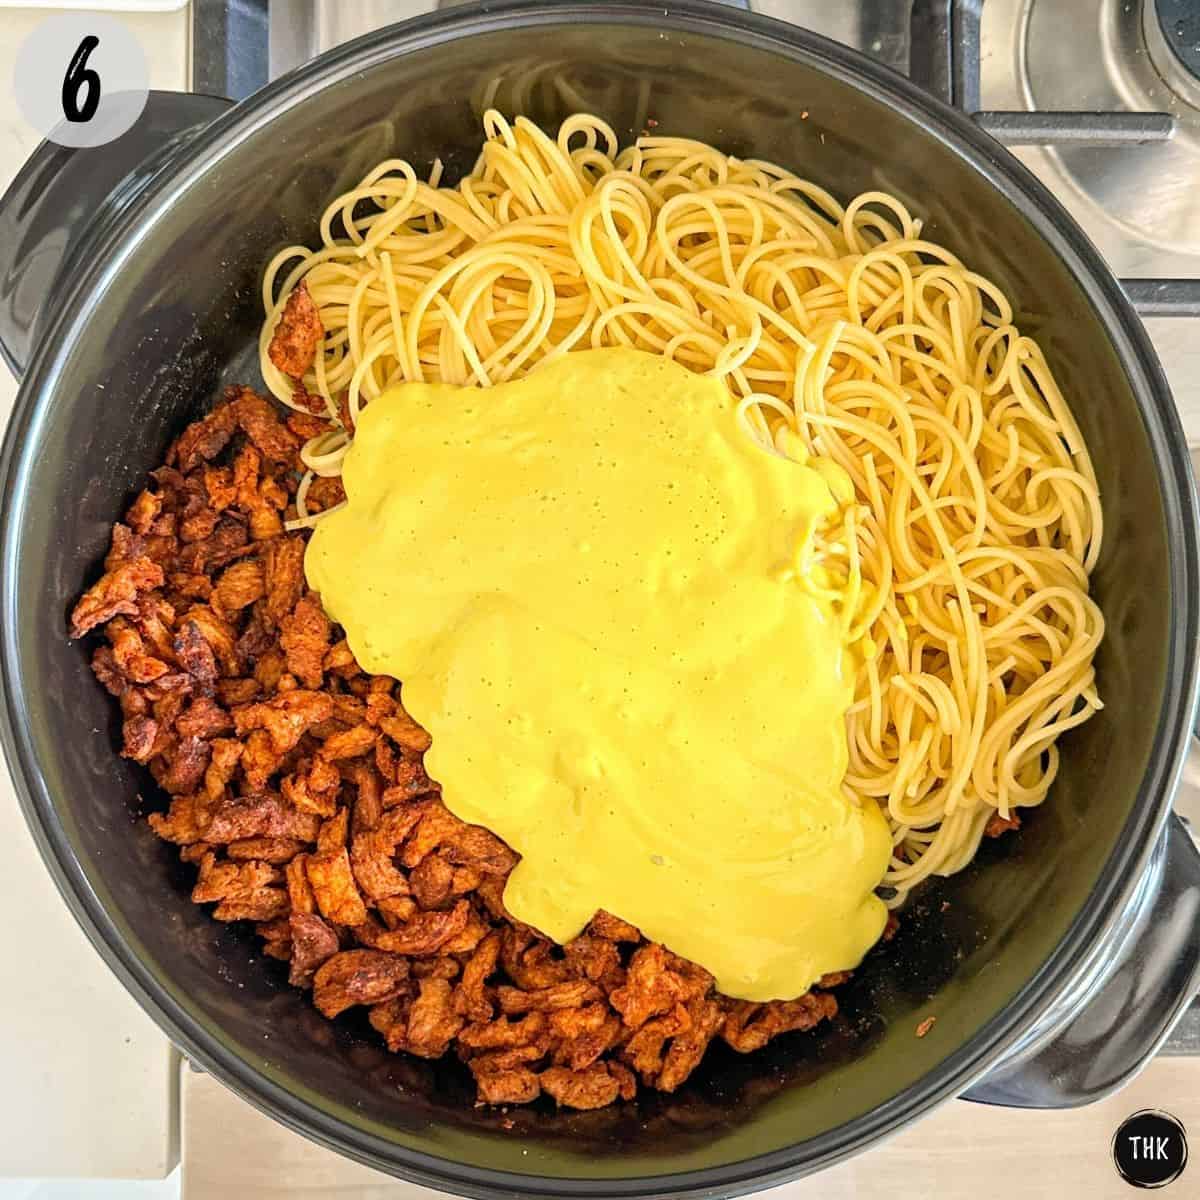 Cooked spaghetti, soy curls and yellow sauce inside large skillet.